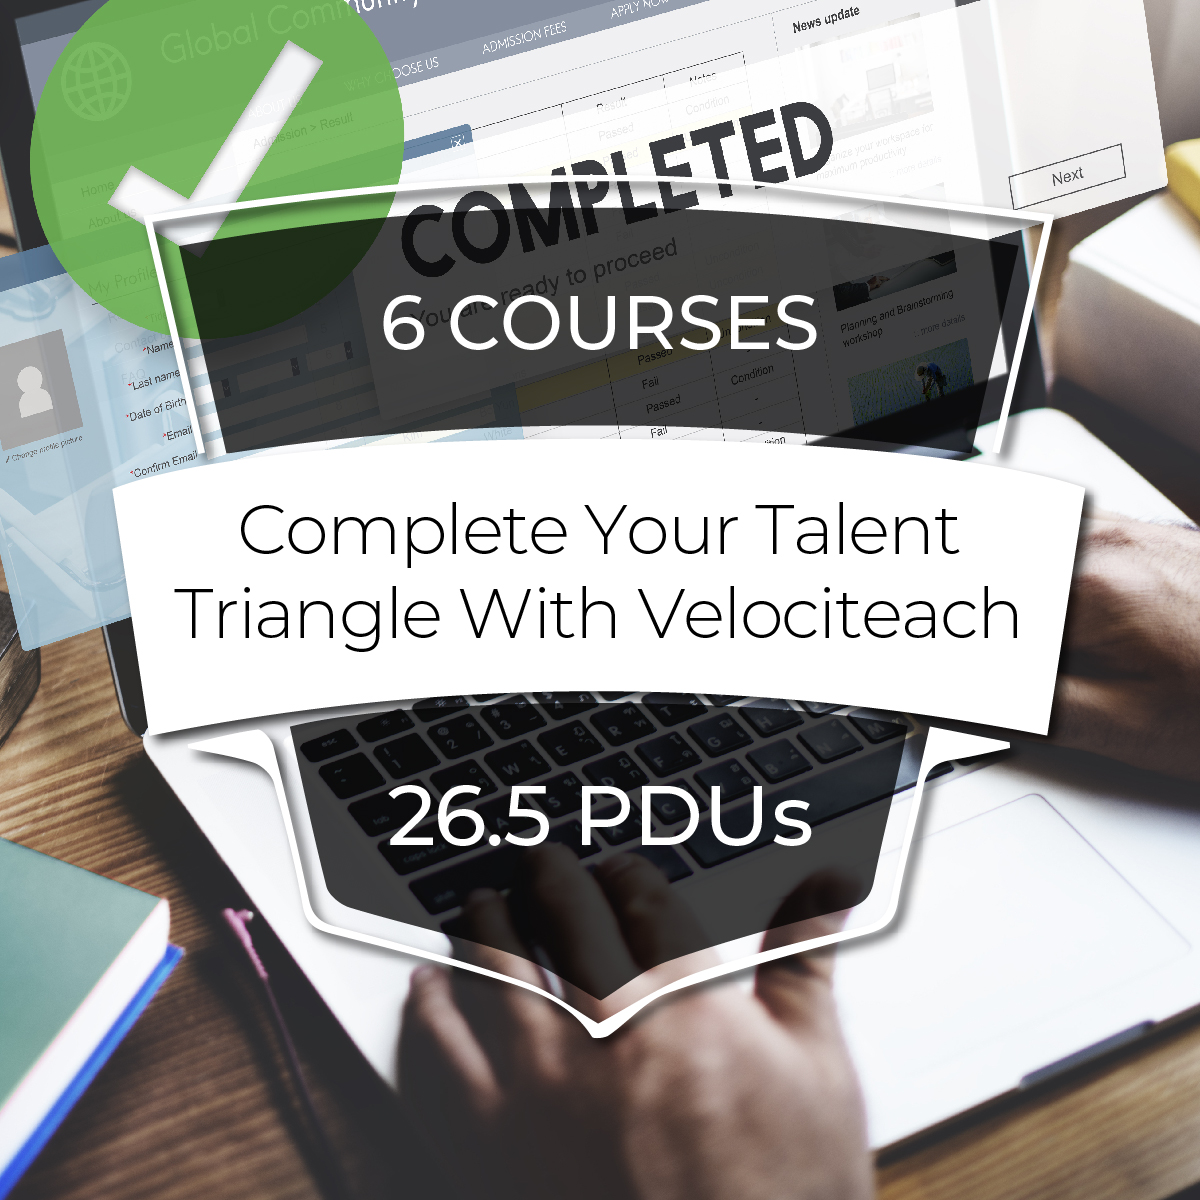 Complete Your Talent Triangle With Velociteach